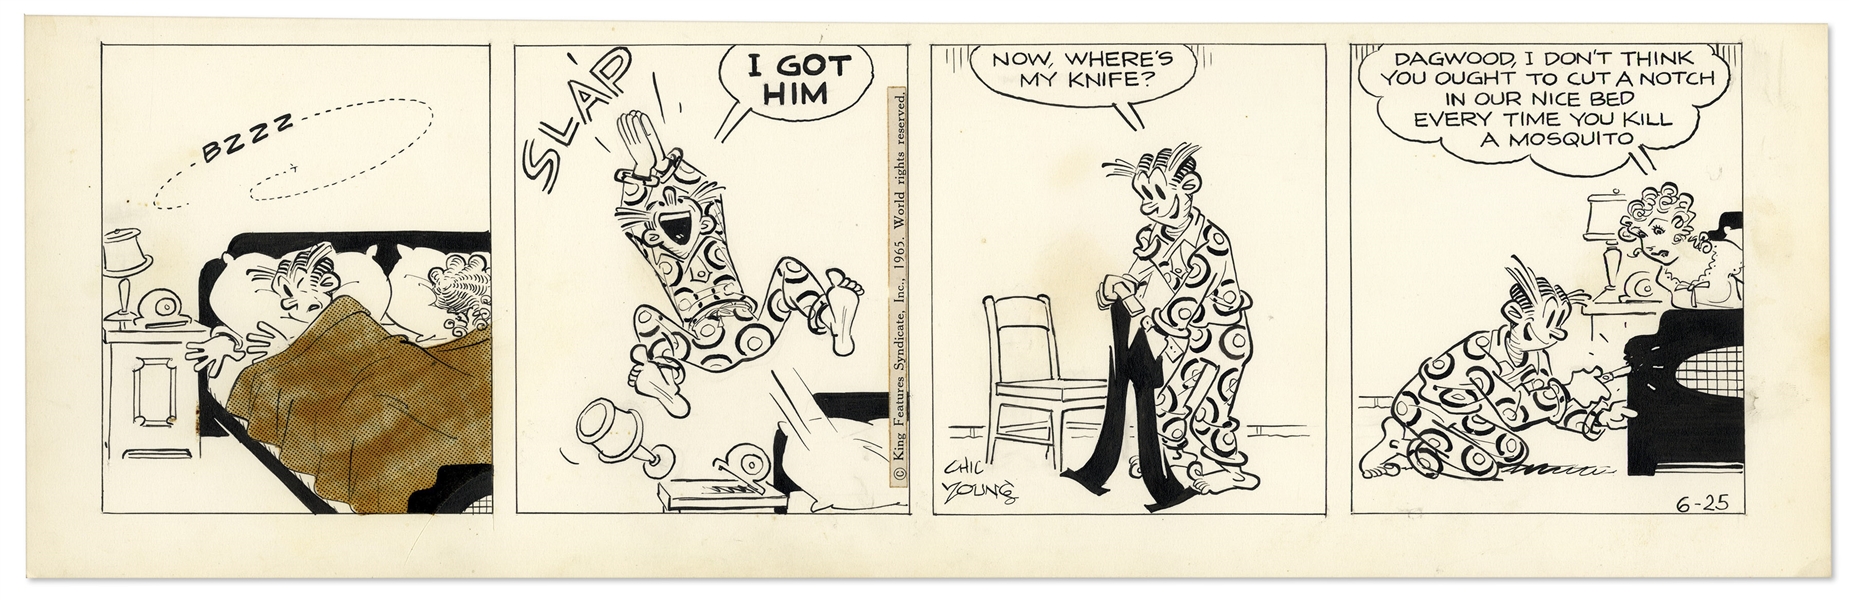 2 Chic Young Hand-Drawn ''Blondie'' Comic Strips From 1965 -- With Chic Young's Original Artwork for Both